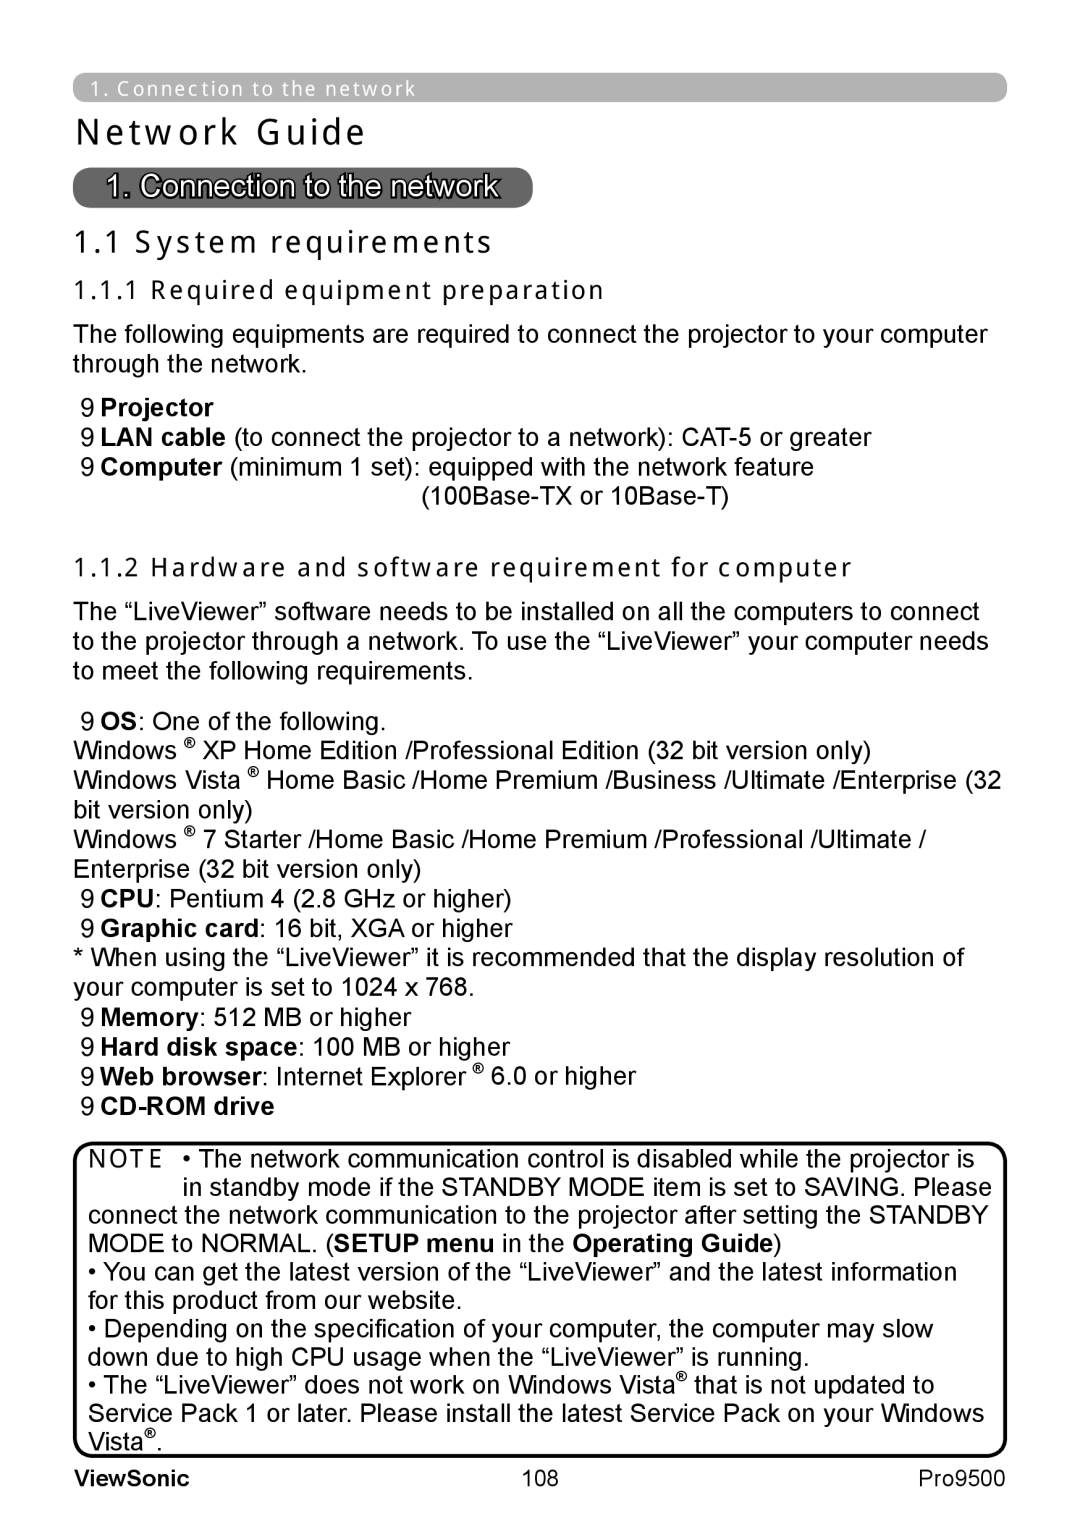 ViewSonic VS13835 Connection to the network, System requirements, Required equipment preparation, CD-ROM drive, 108 